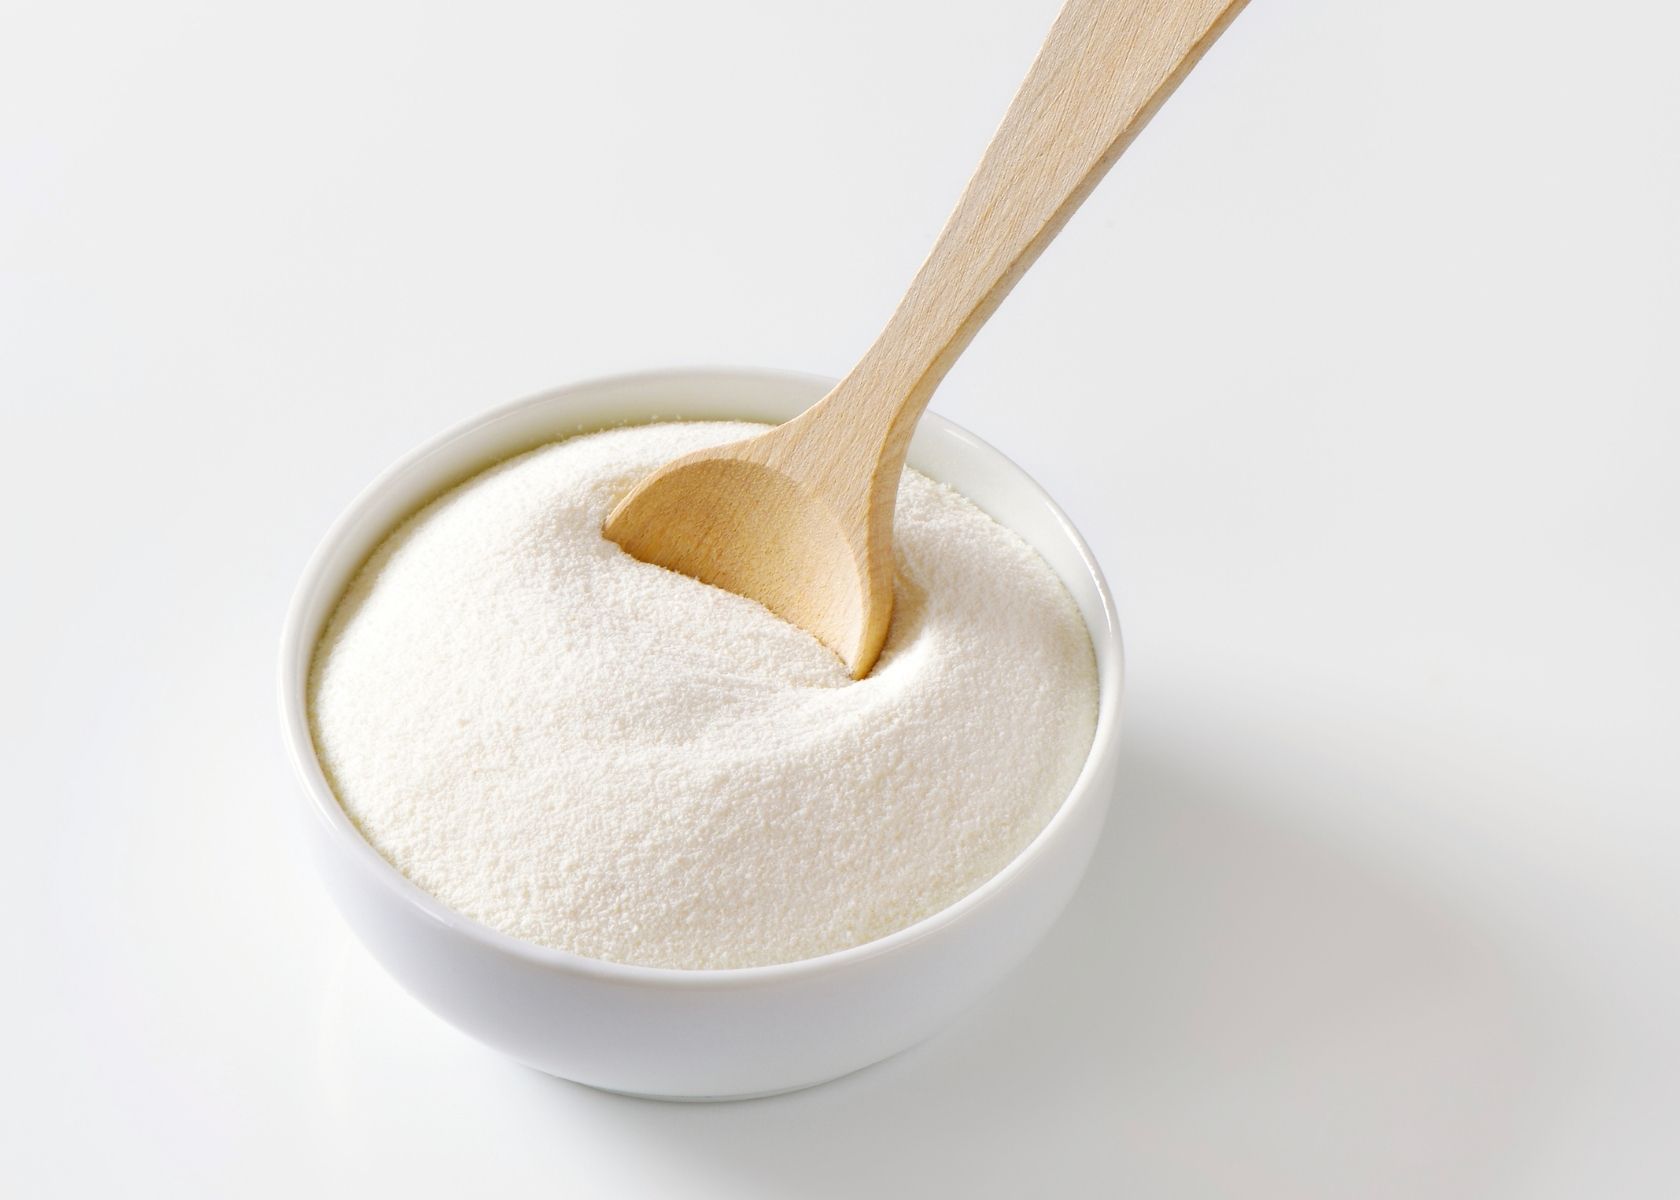 Large mound of xanthan gum powder in white bowl with wooden spoon.